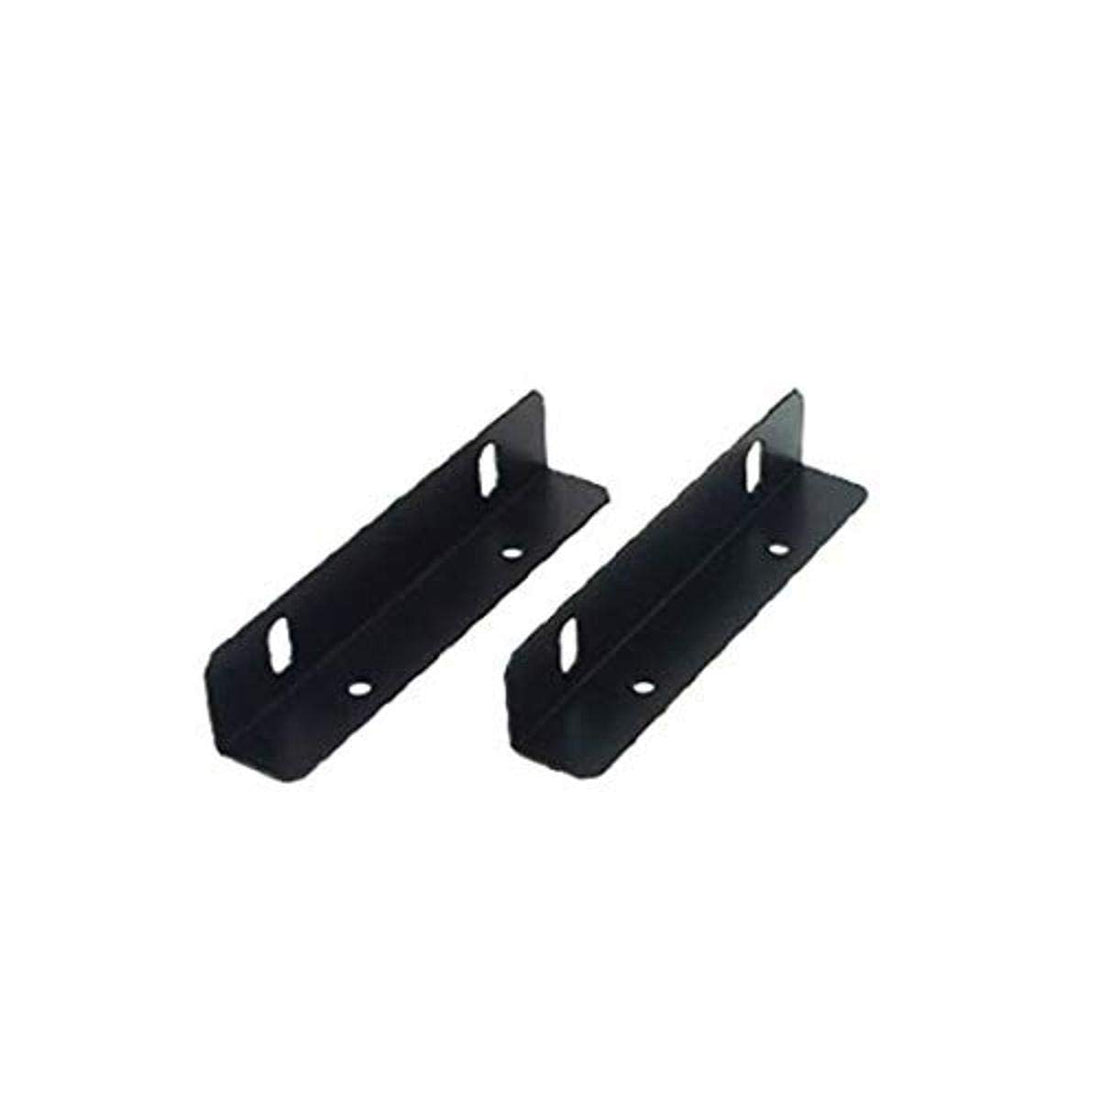 Replacement Part - Rack Mount Brackets (for Pyle Model: PMXAKB2000)